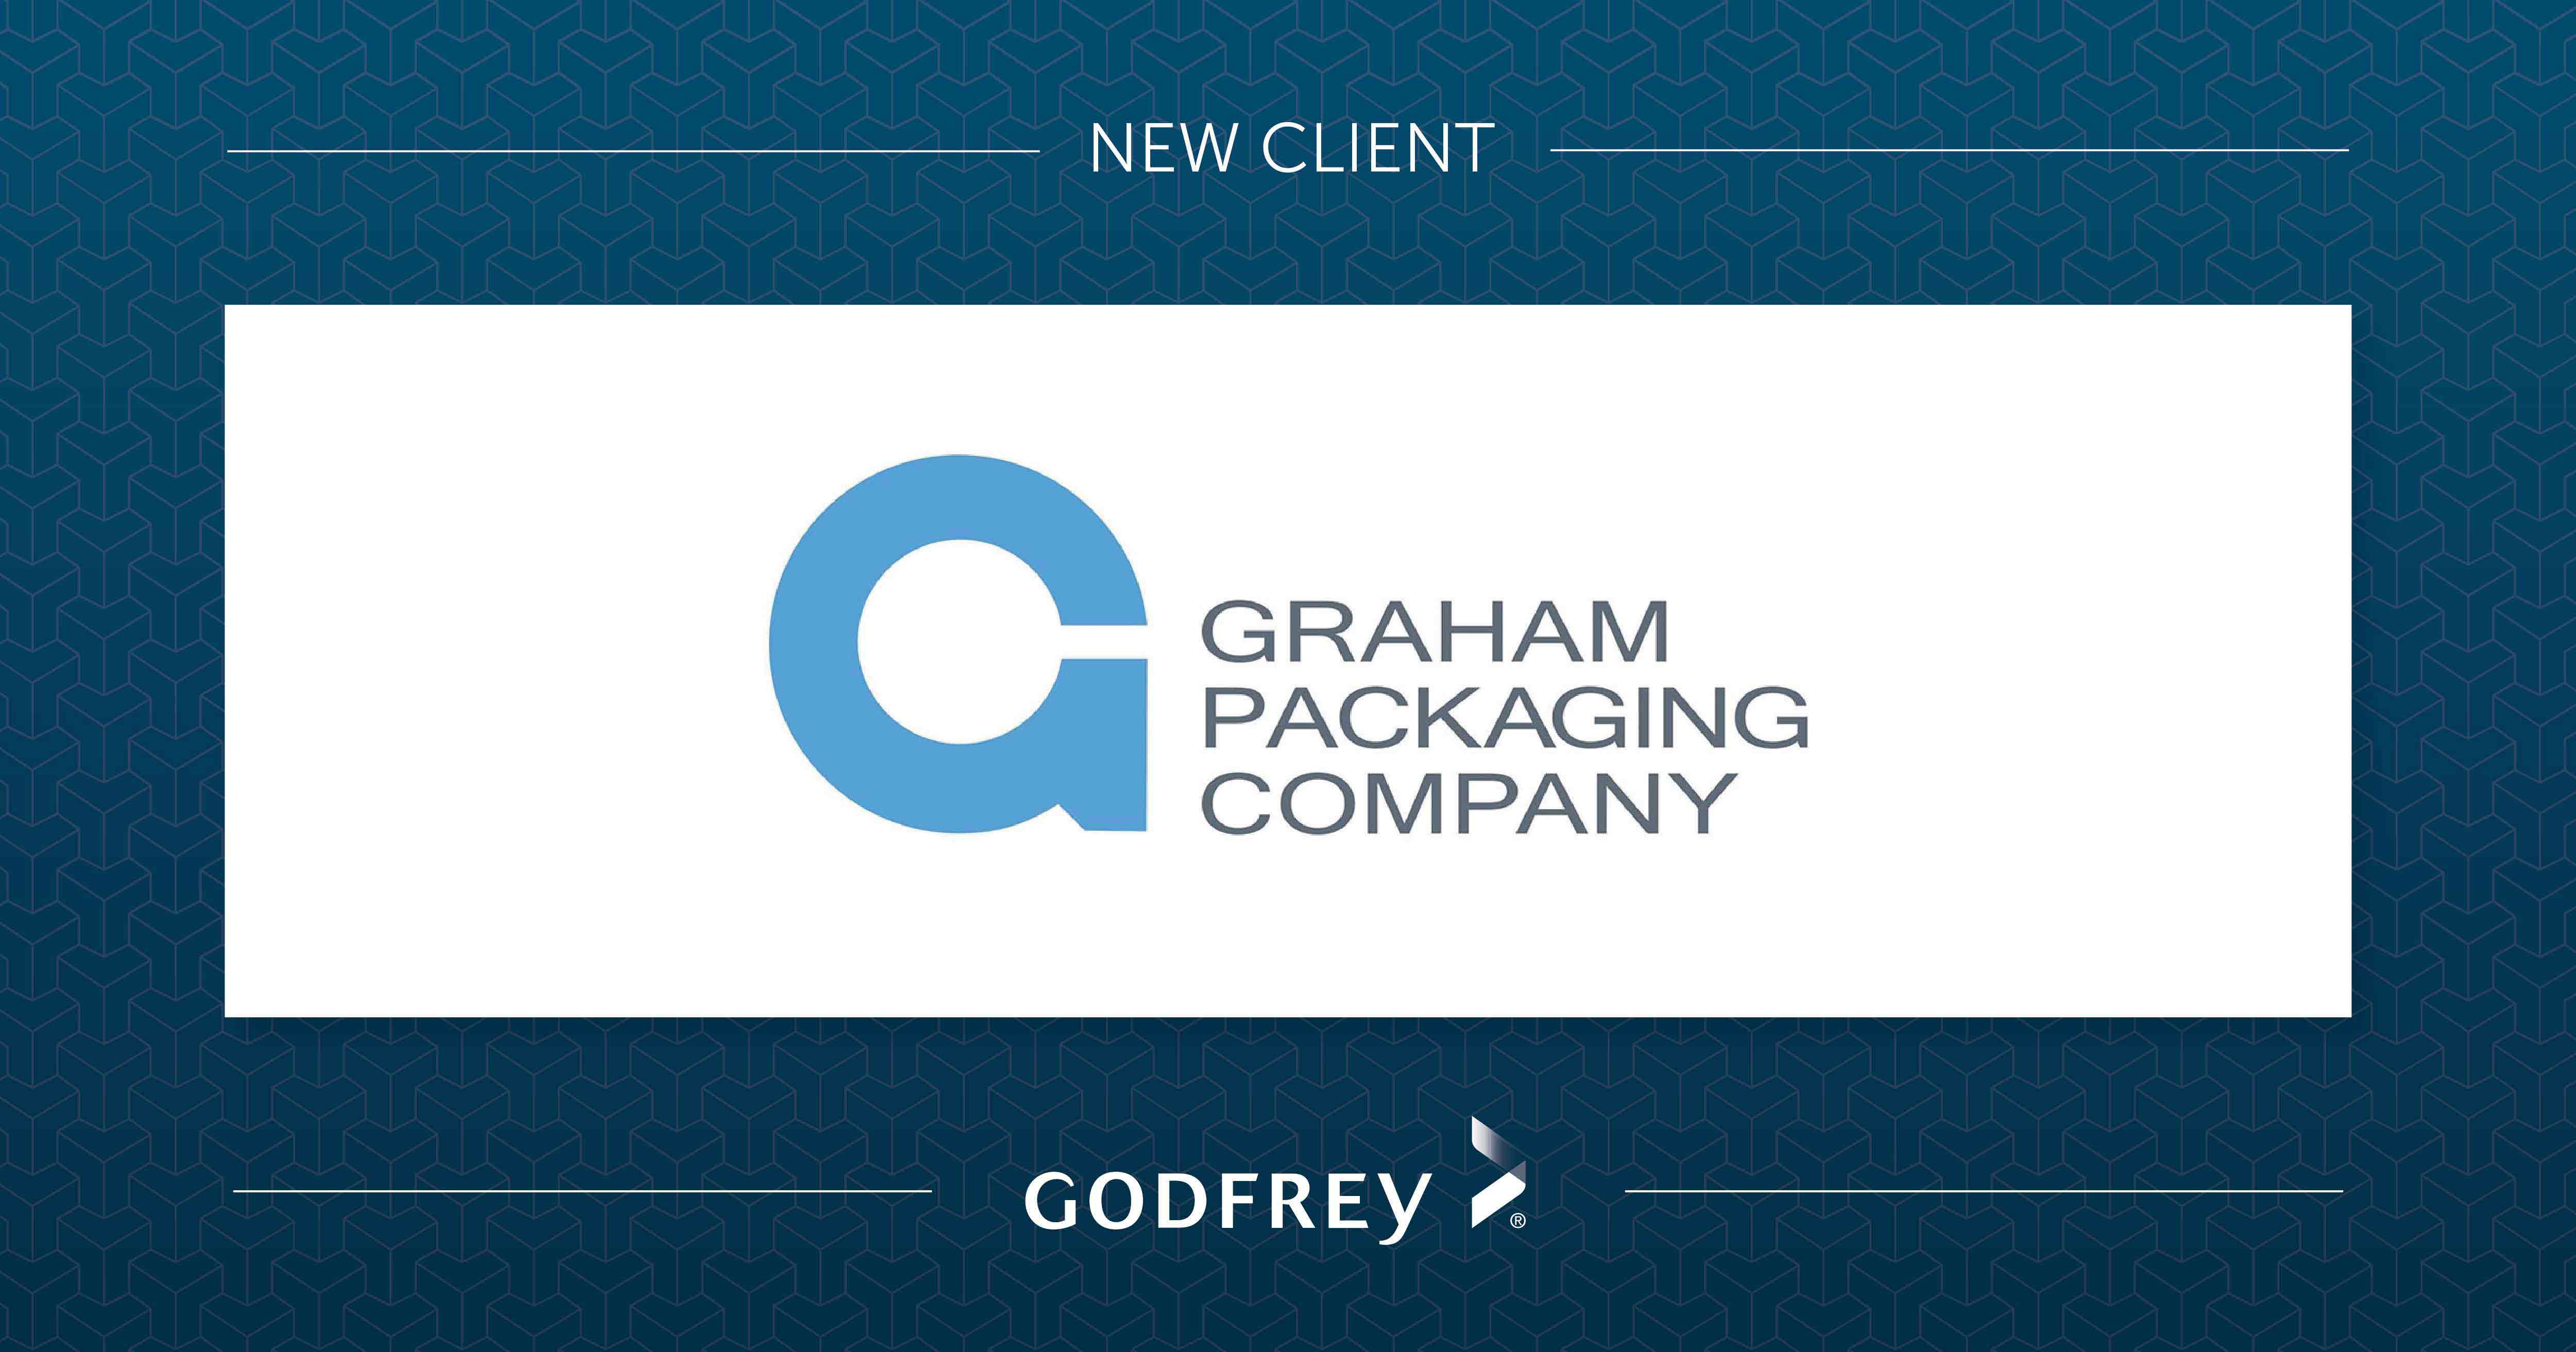 New Client- Graham Packaging Company logo